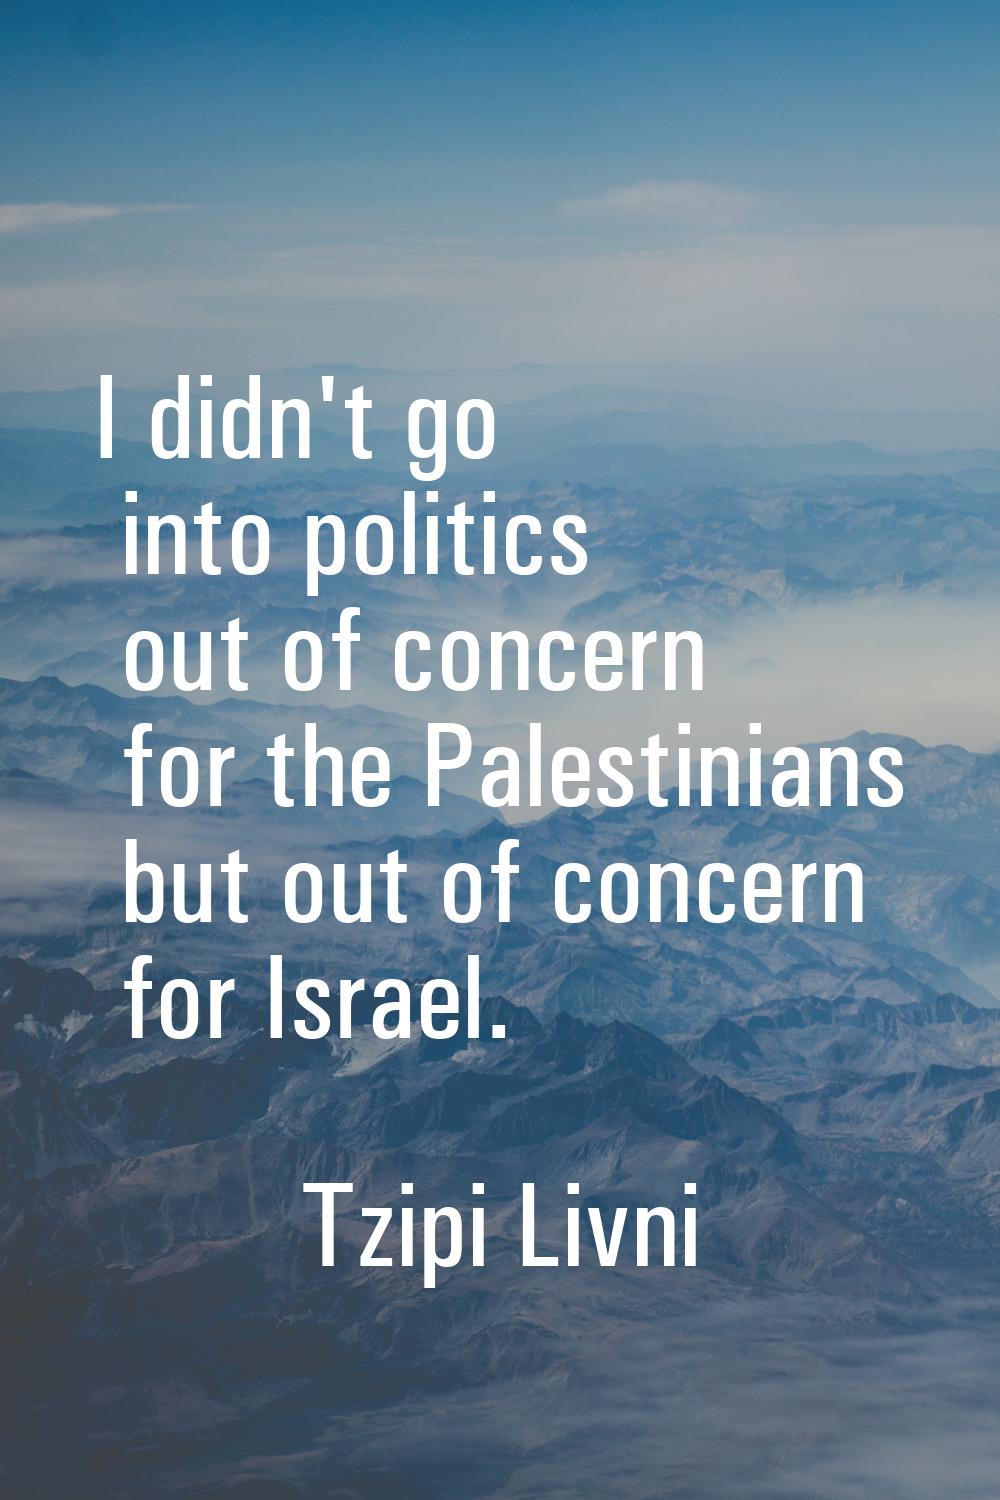 I didn't go into politics out of concern for the Palestinians but out of concern for Israel.